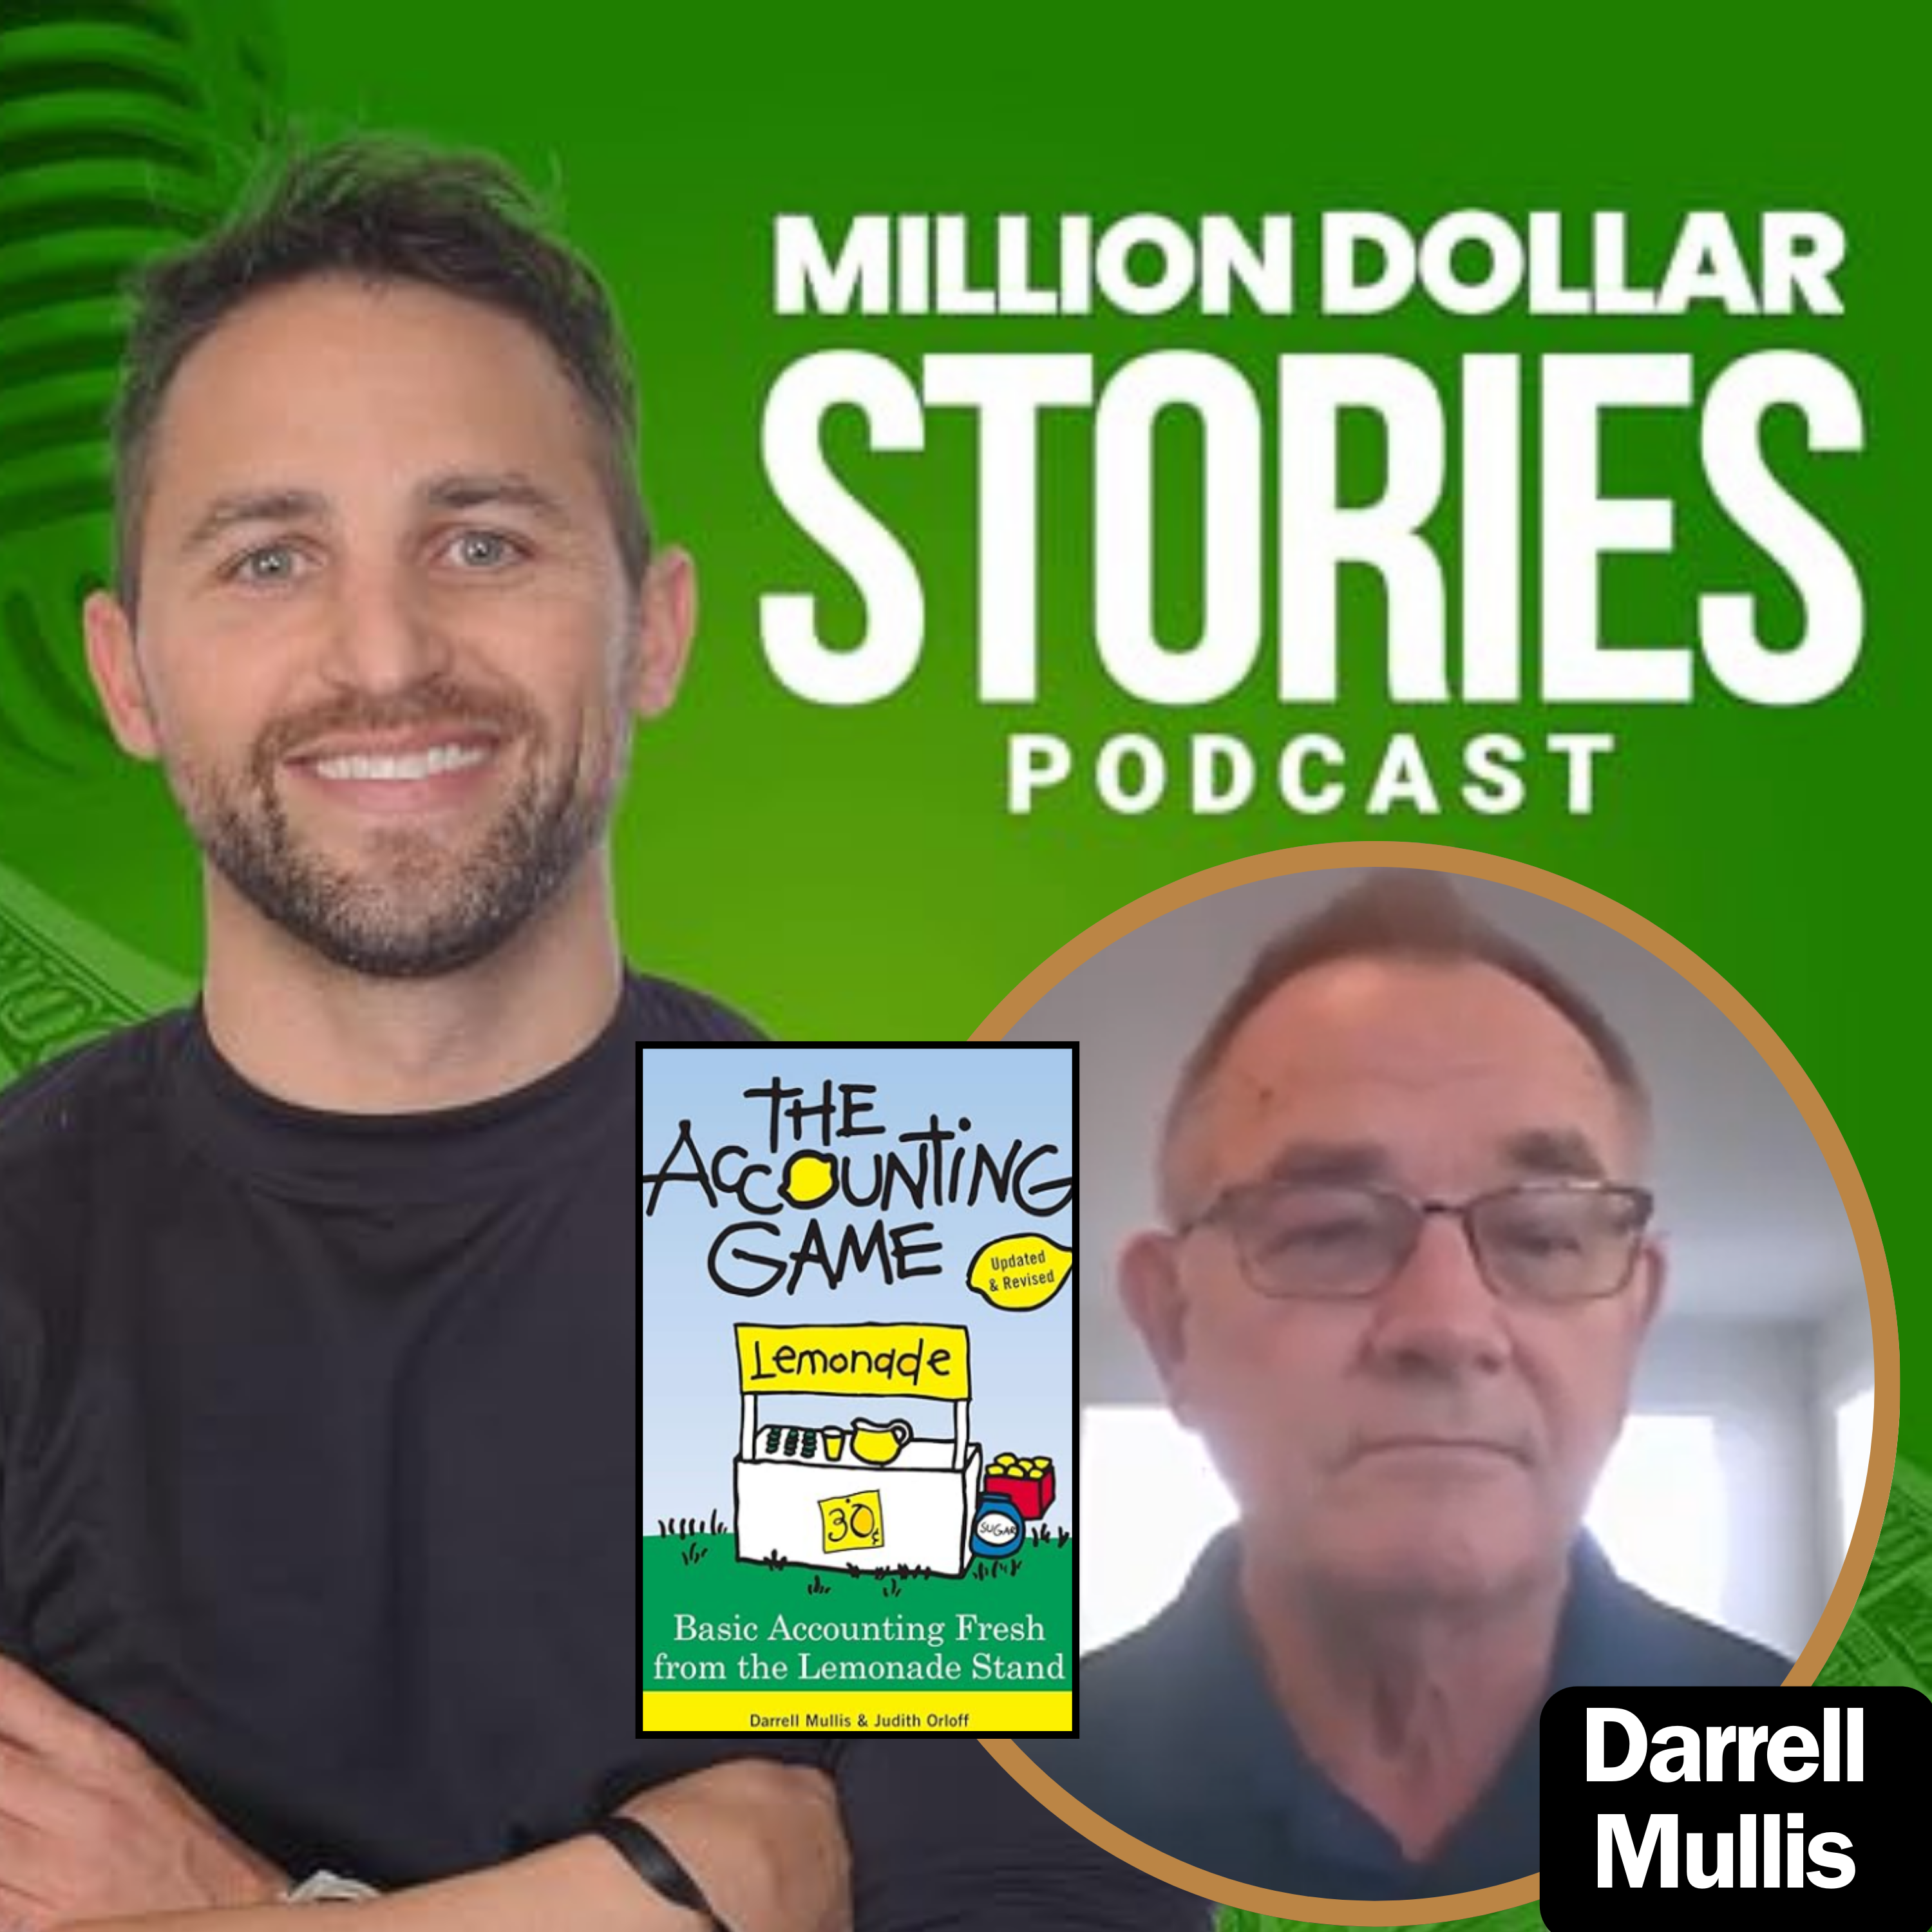 Darrell Mullis – Author of “The Accounting Game: Learn the Basics of Financial Accounting – As Easy as Running a Lemonade Stand (Basics for Entrepreneurs and Small Business Owners)”